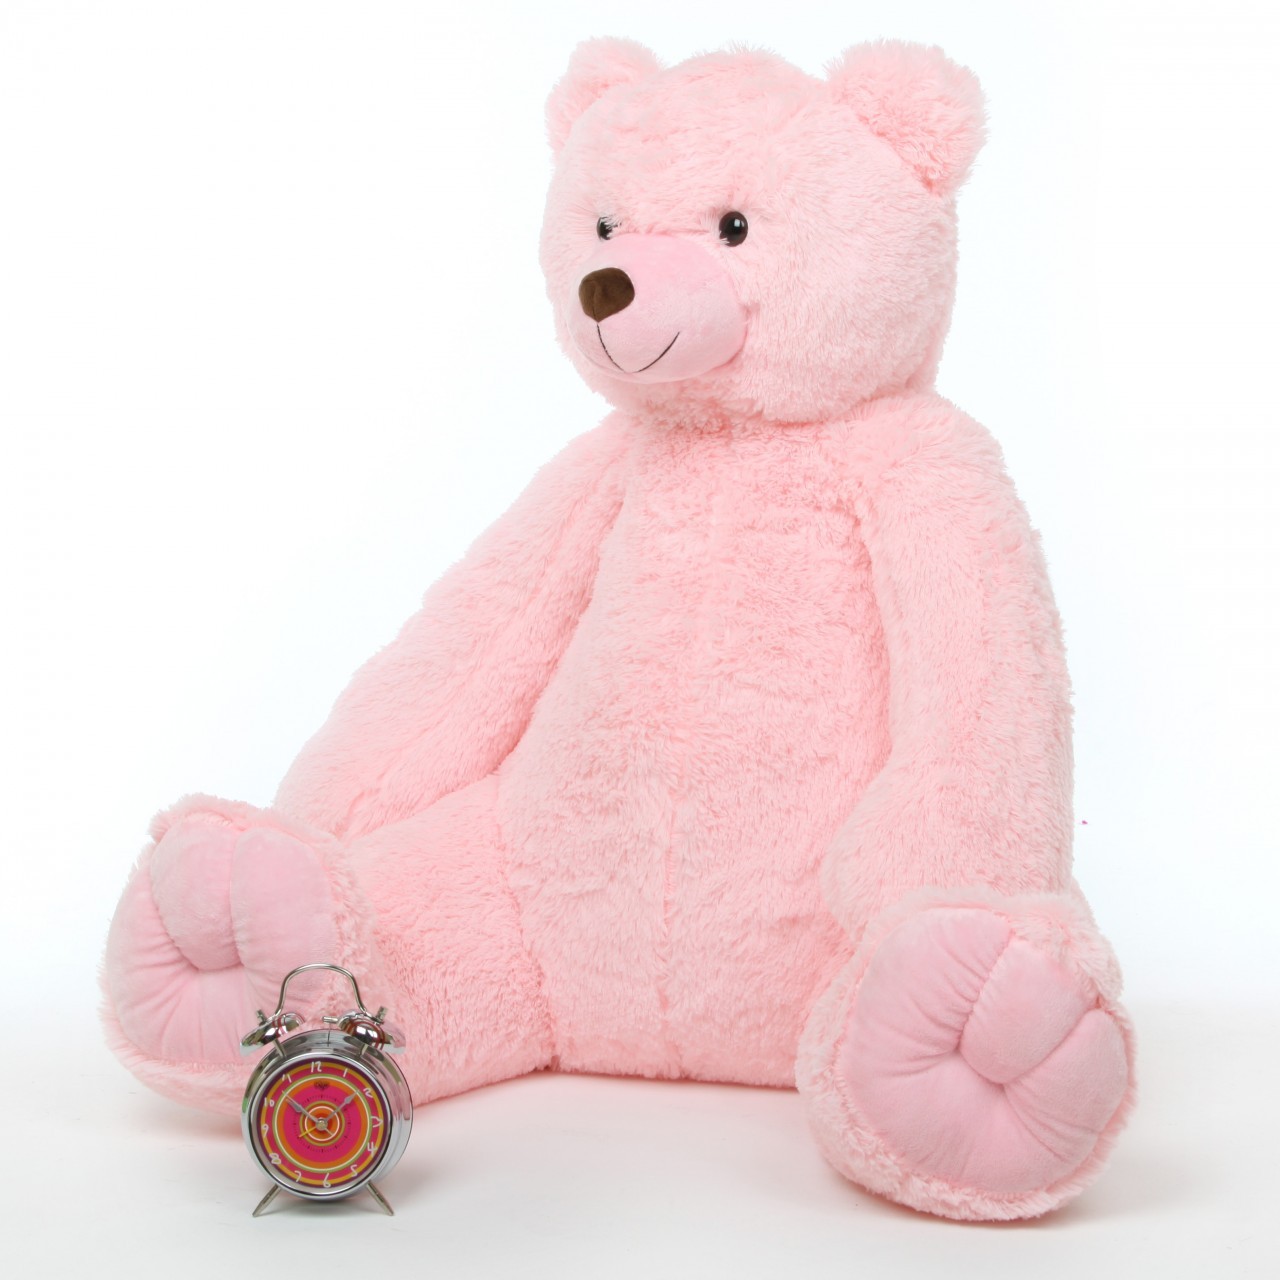 Lovely and Cute Pink Teddy Bear - Colors Photo (34605181 